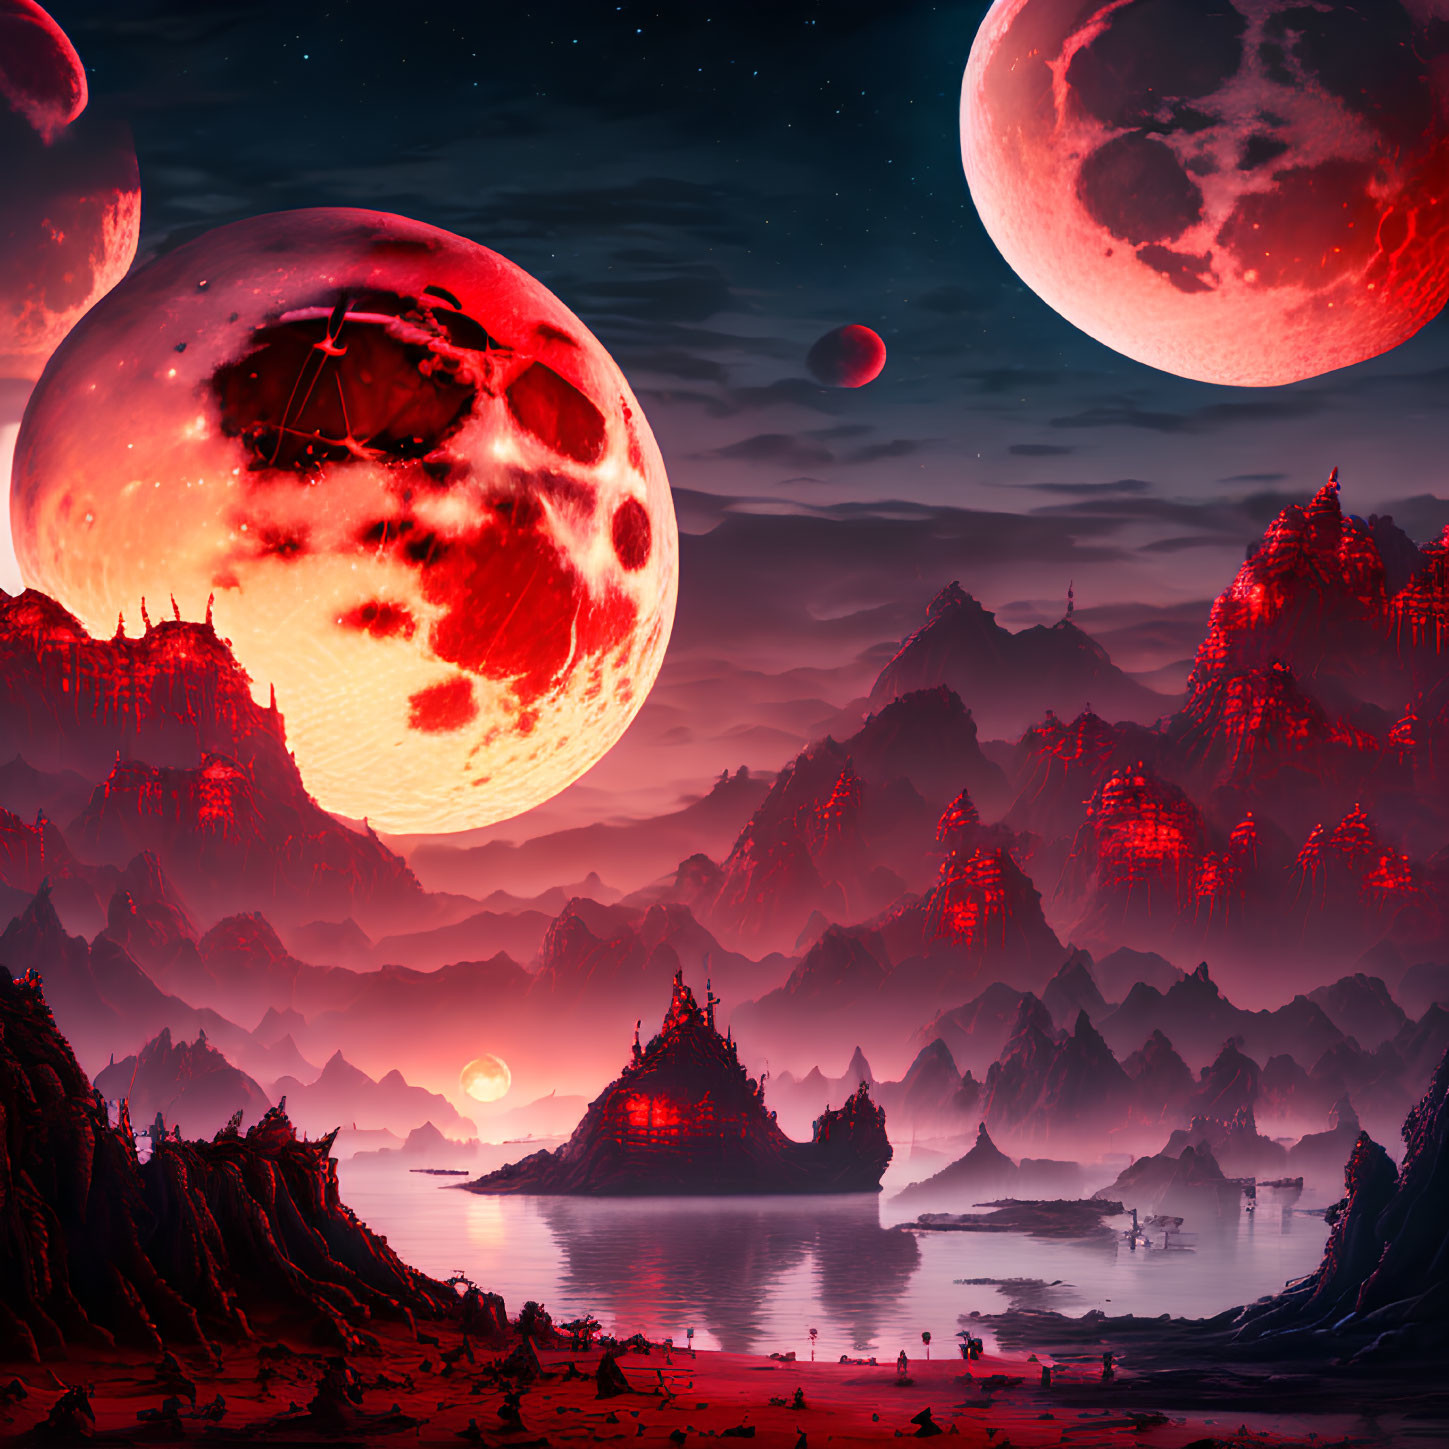 Surreal landscape: Spiky mountains, red sky, three moons, calm waters